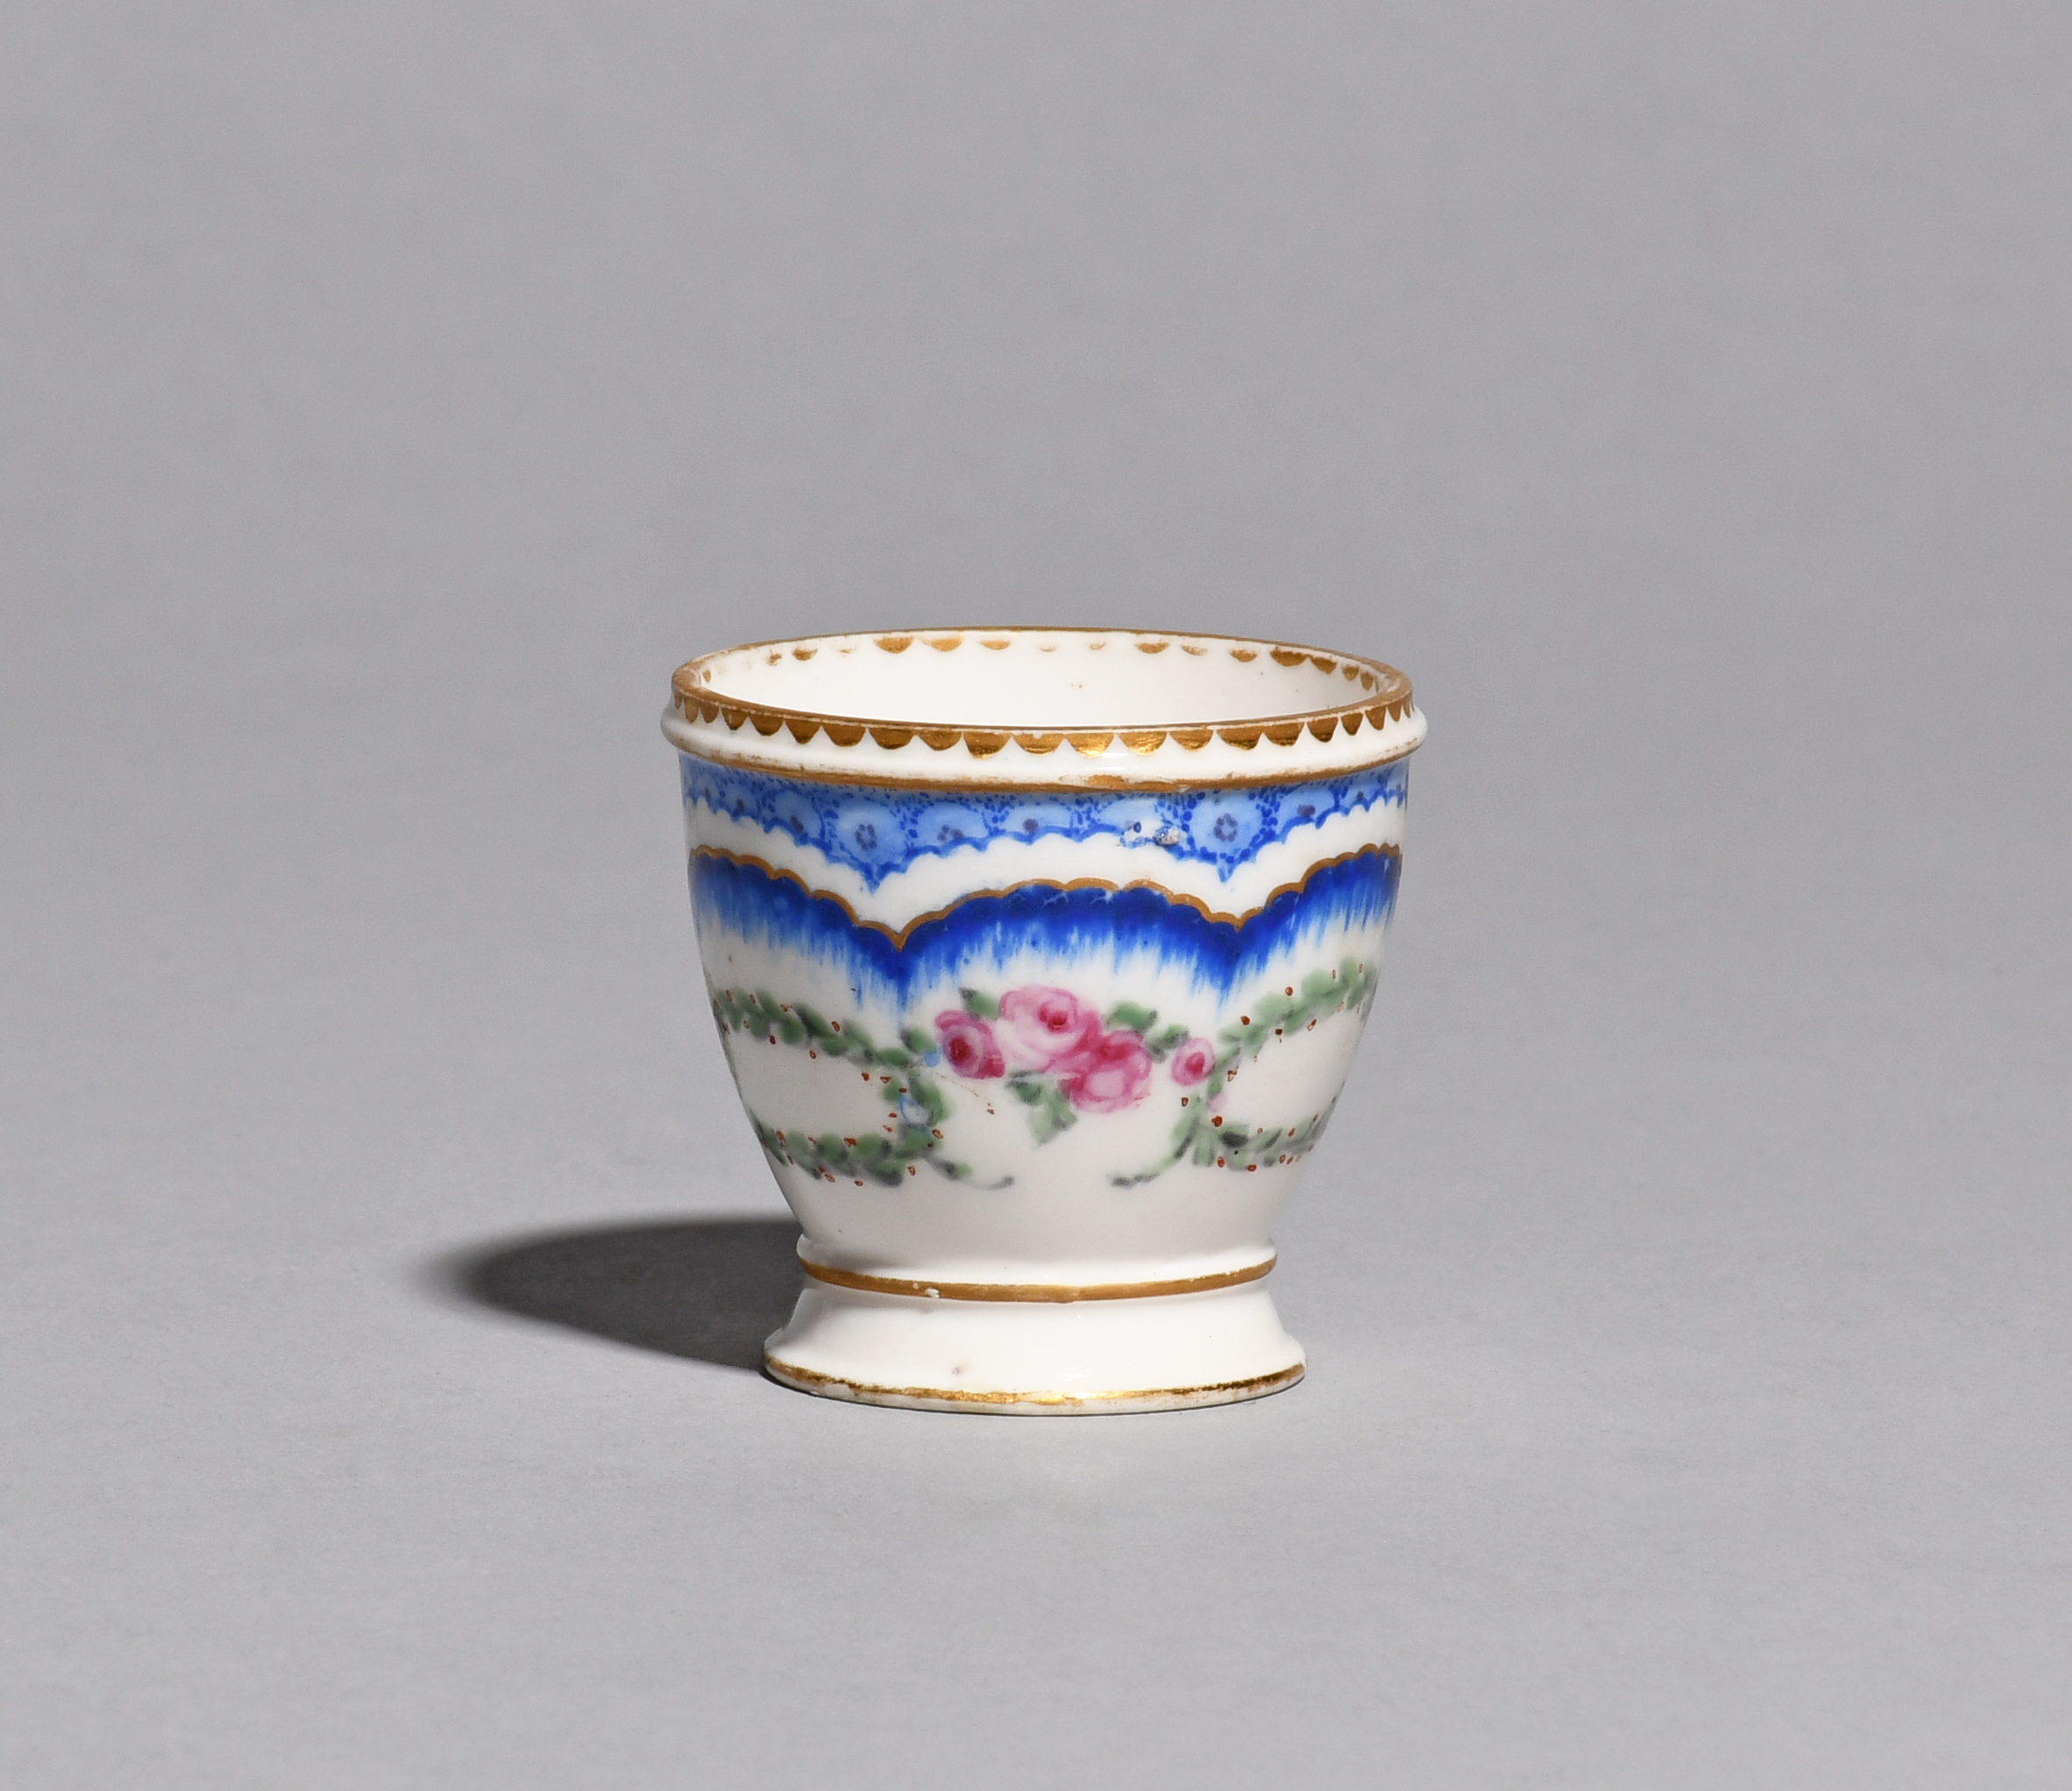 A Sèvres egg cup (coquetier) c.1770-80, the small rounded shape painted by Jean-Charles Sioux l'aine - Image 2 of 2